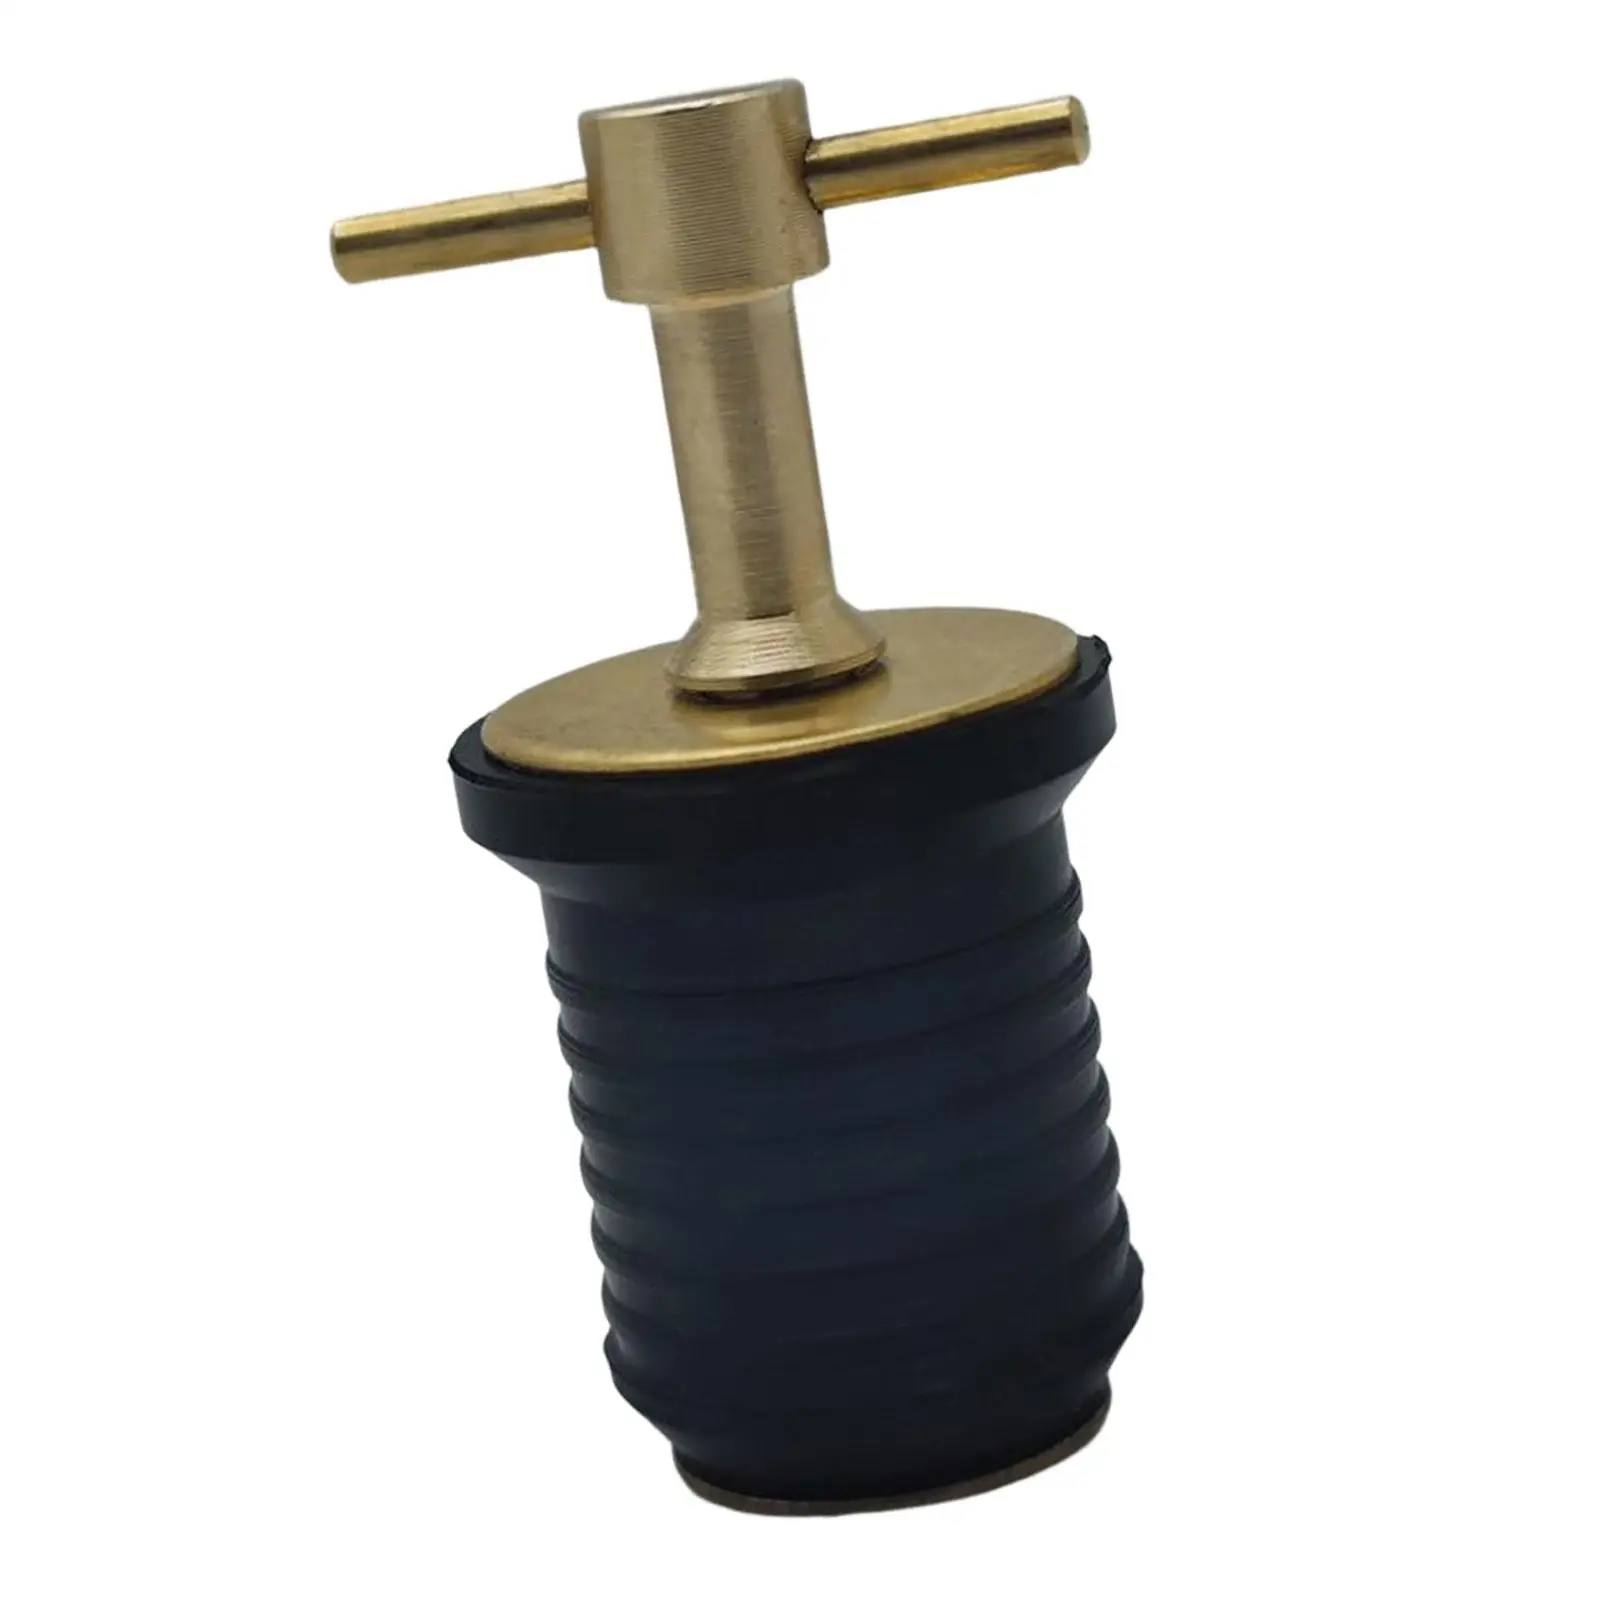 

Boat Drain Plug 1inch Twist in Locks in Place for 1inch Diameter Drains Marine Accessories T Handle for Yachts Kayaks Boats